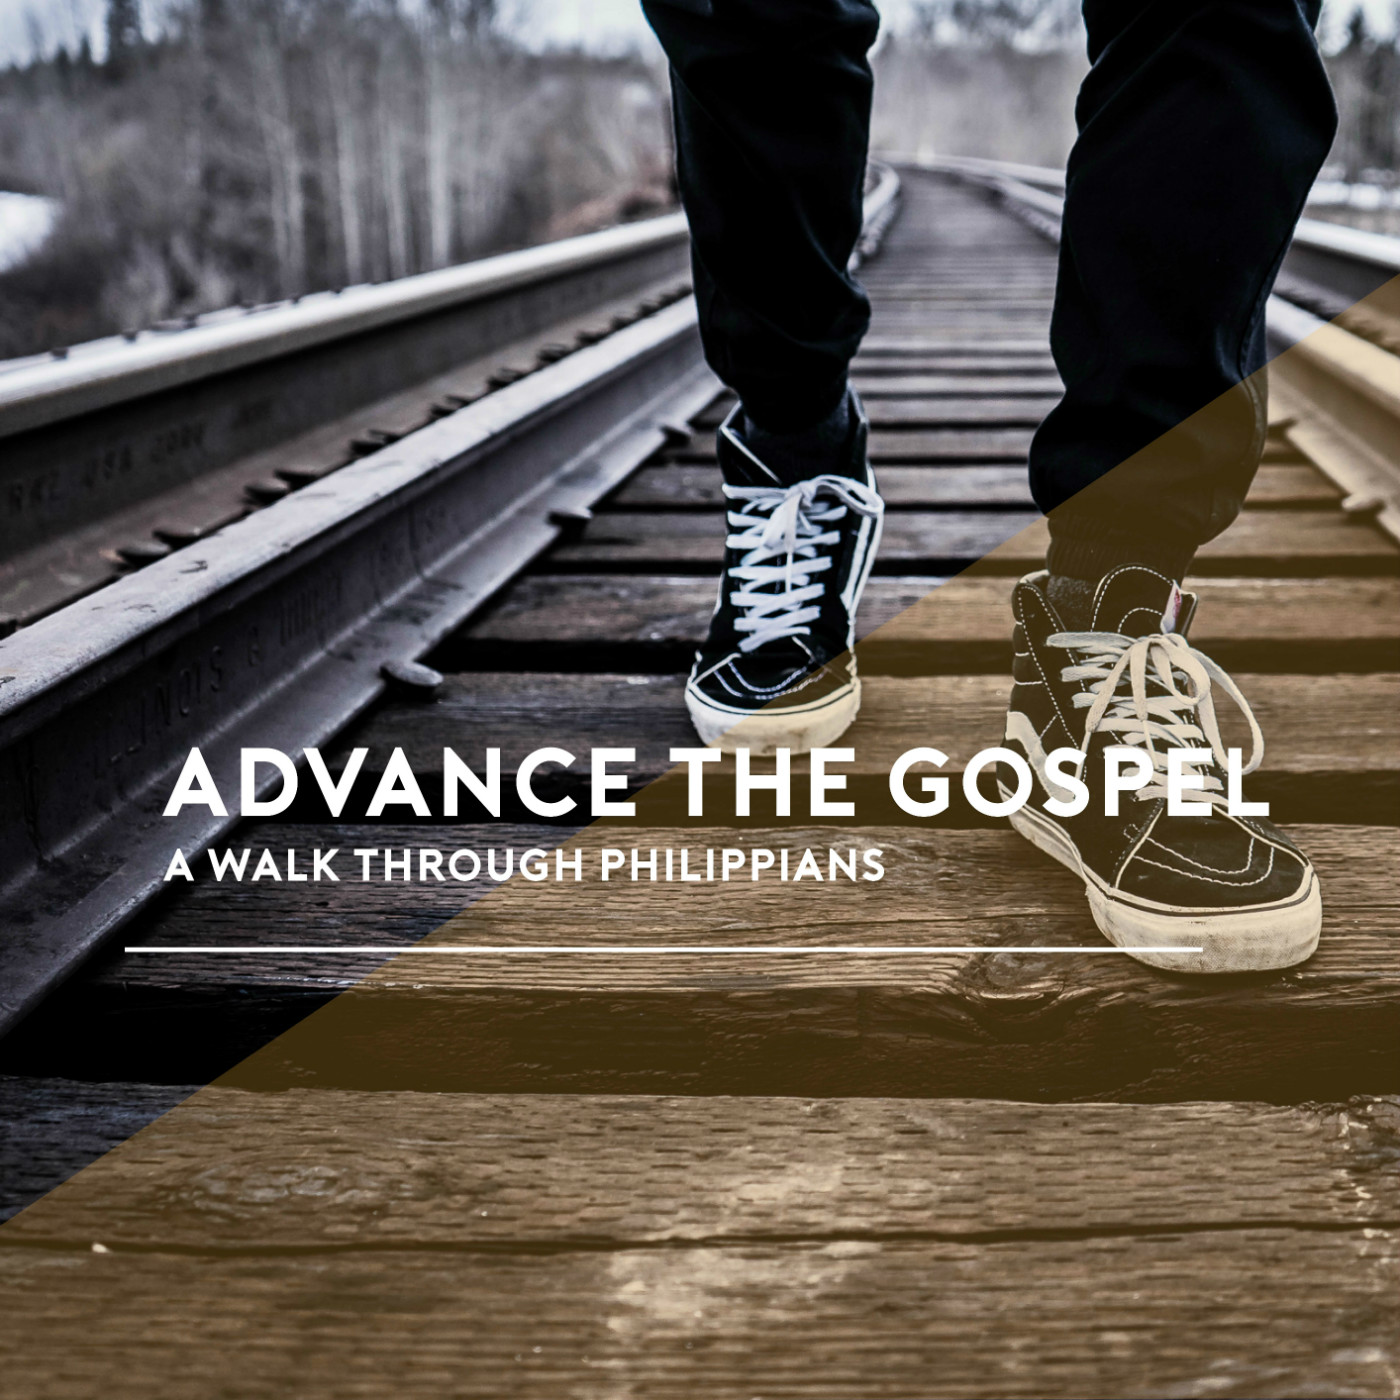 From The Advance The Gospel Series: Philippians Part 12